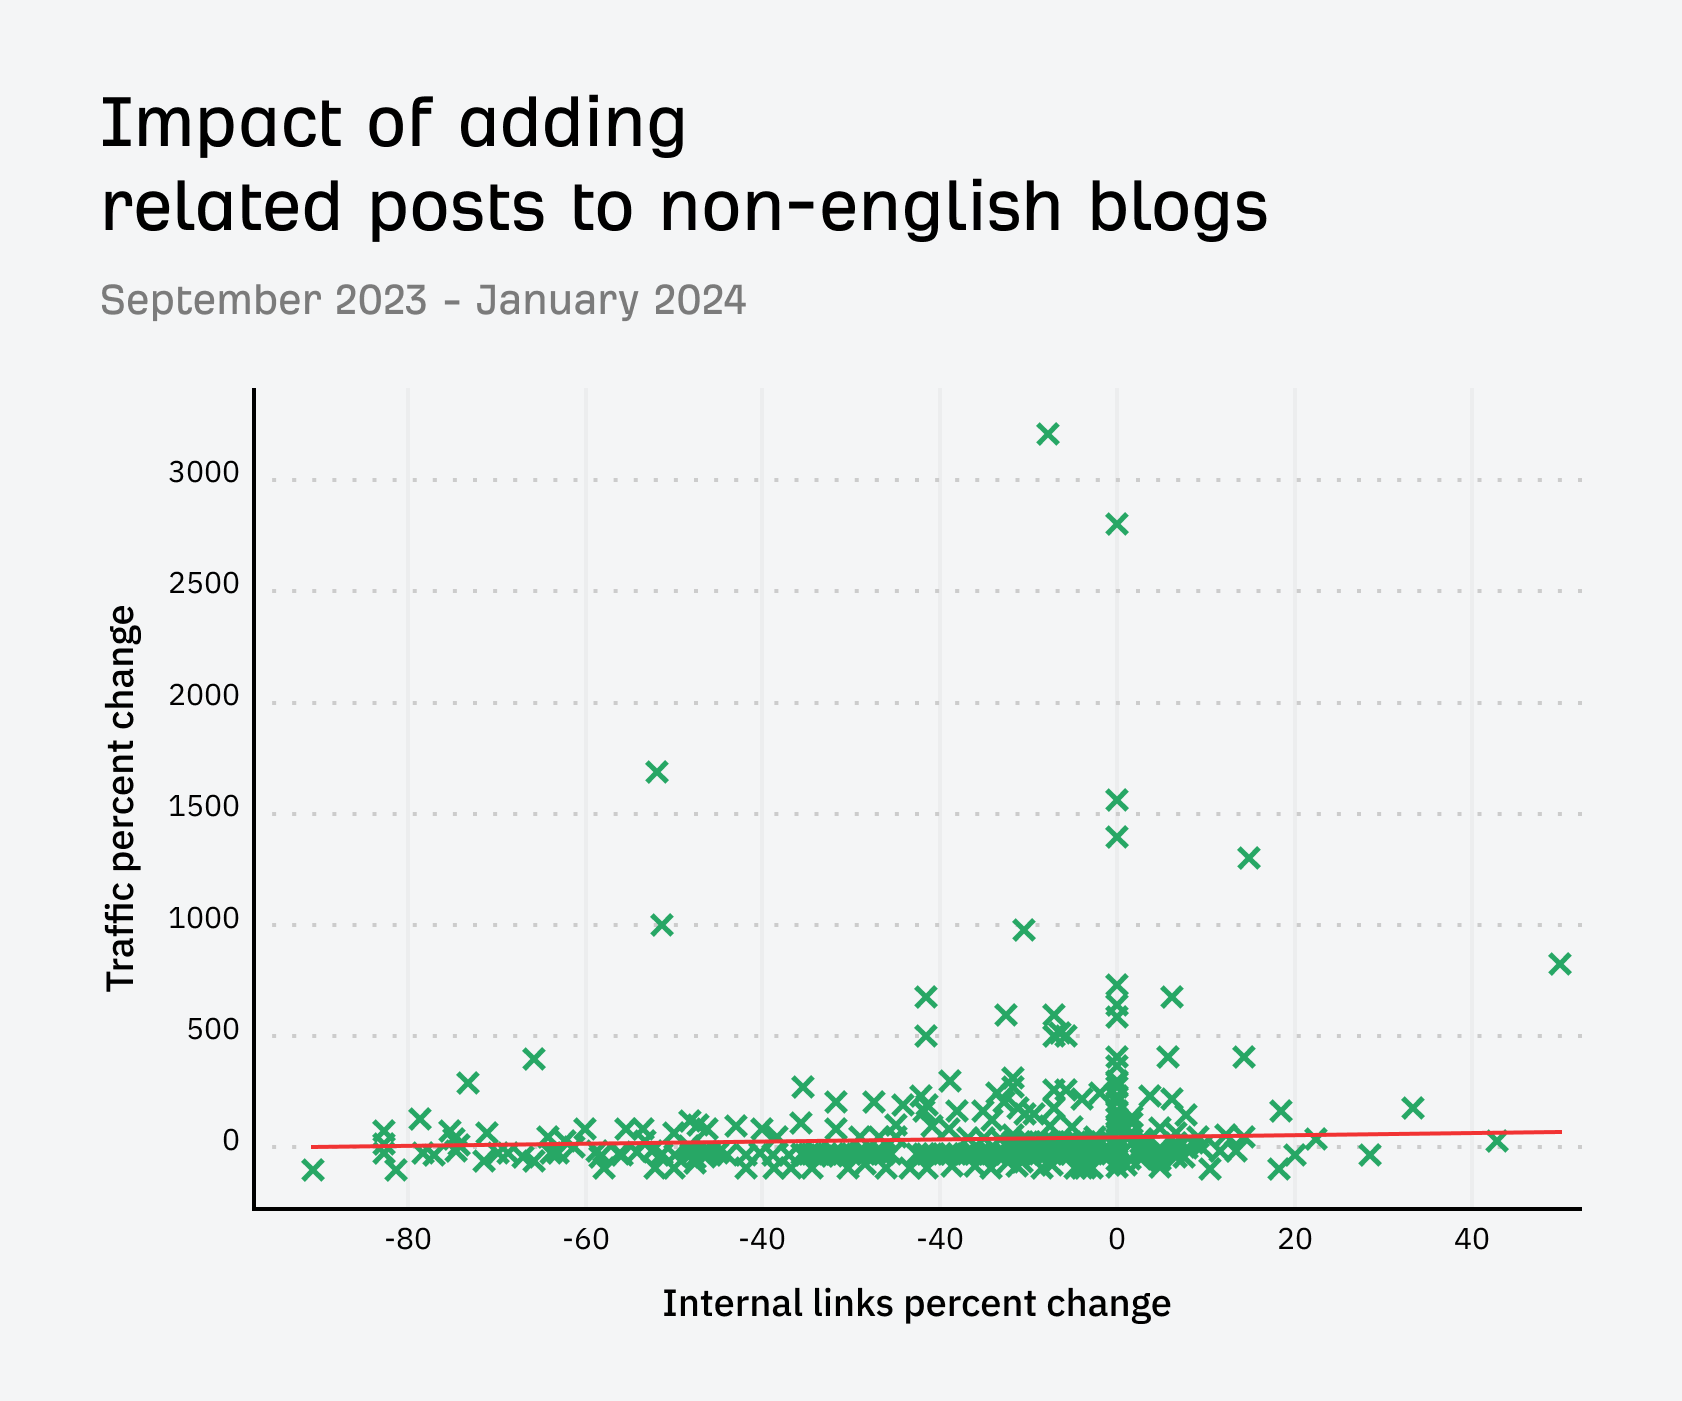 Impact of adding related posts to non-English blogs over a longer time period